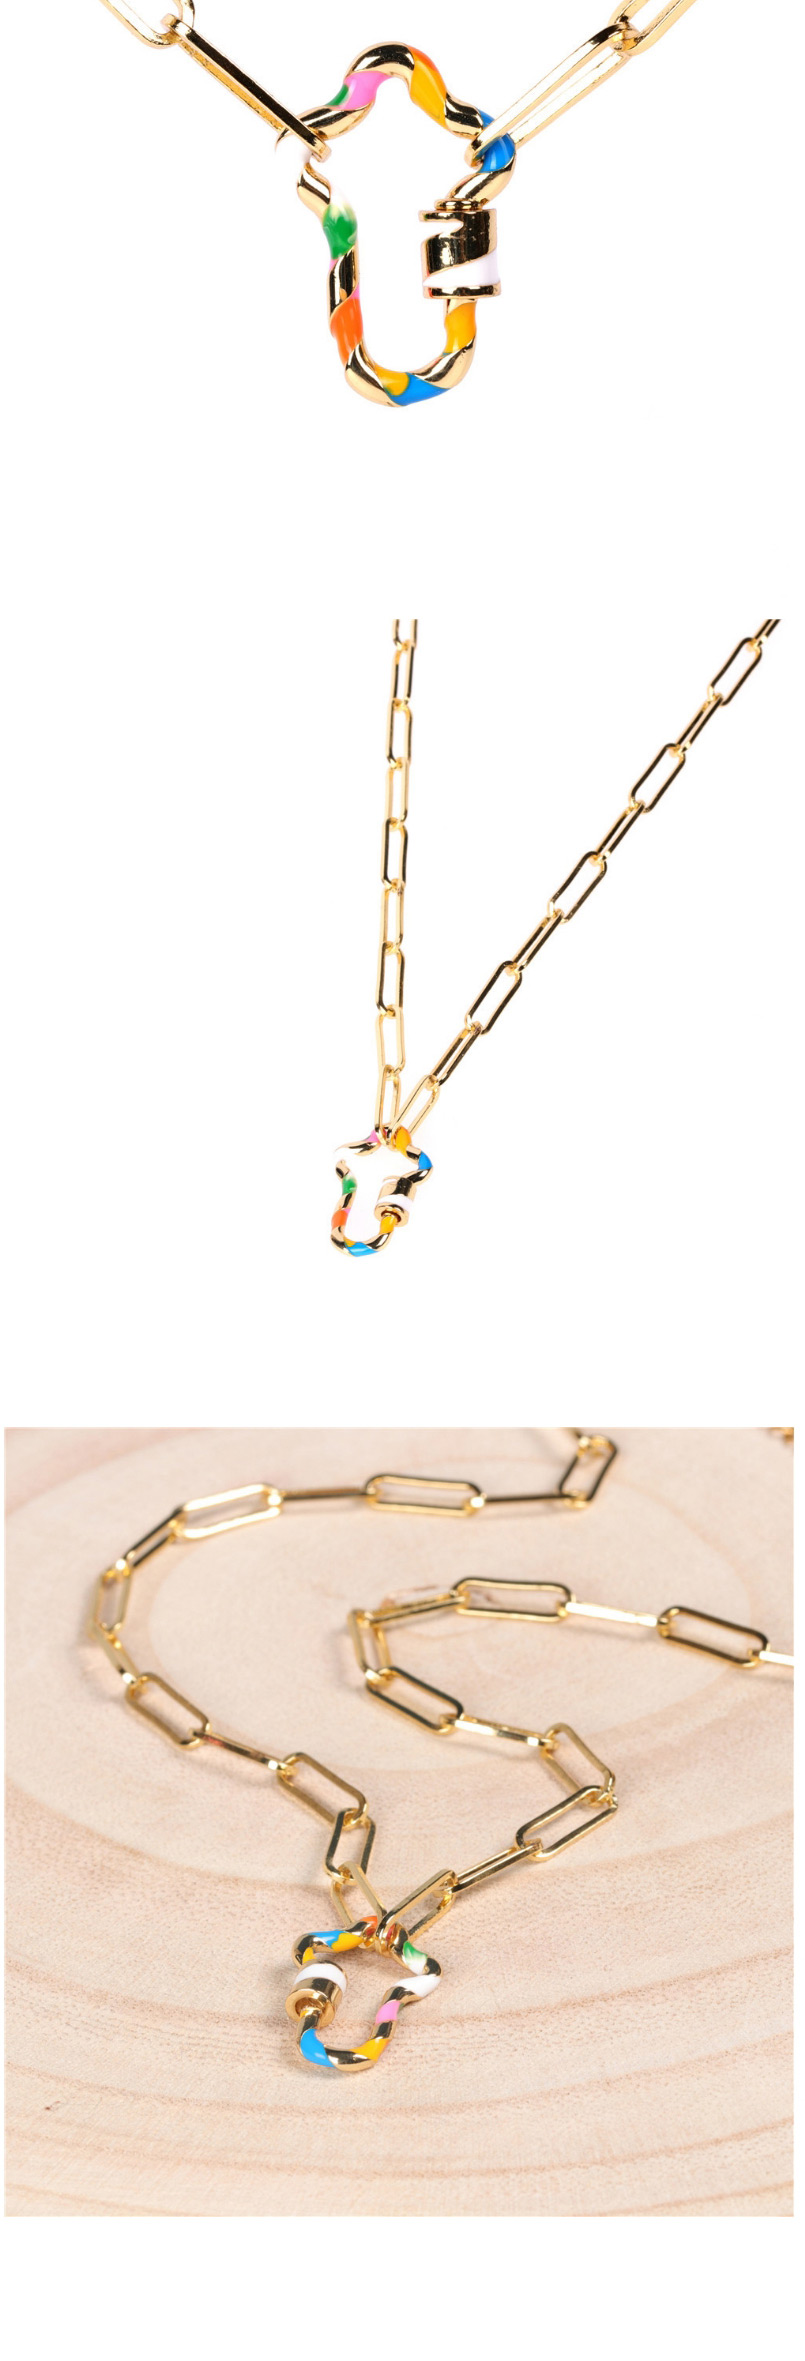 Fashion Small Lightning-40cm Thick Chain Oil Drop Lightning Love Cross Geometric Hollow Necklace,Necklaces